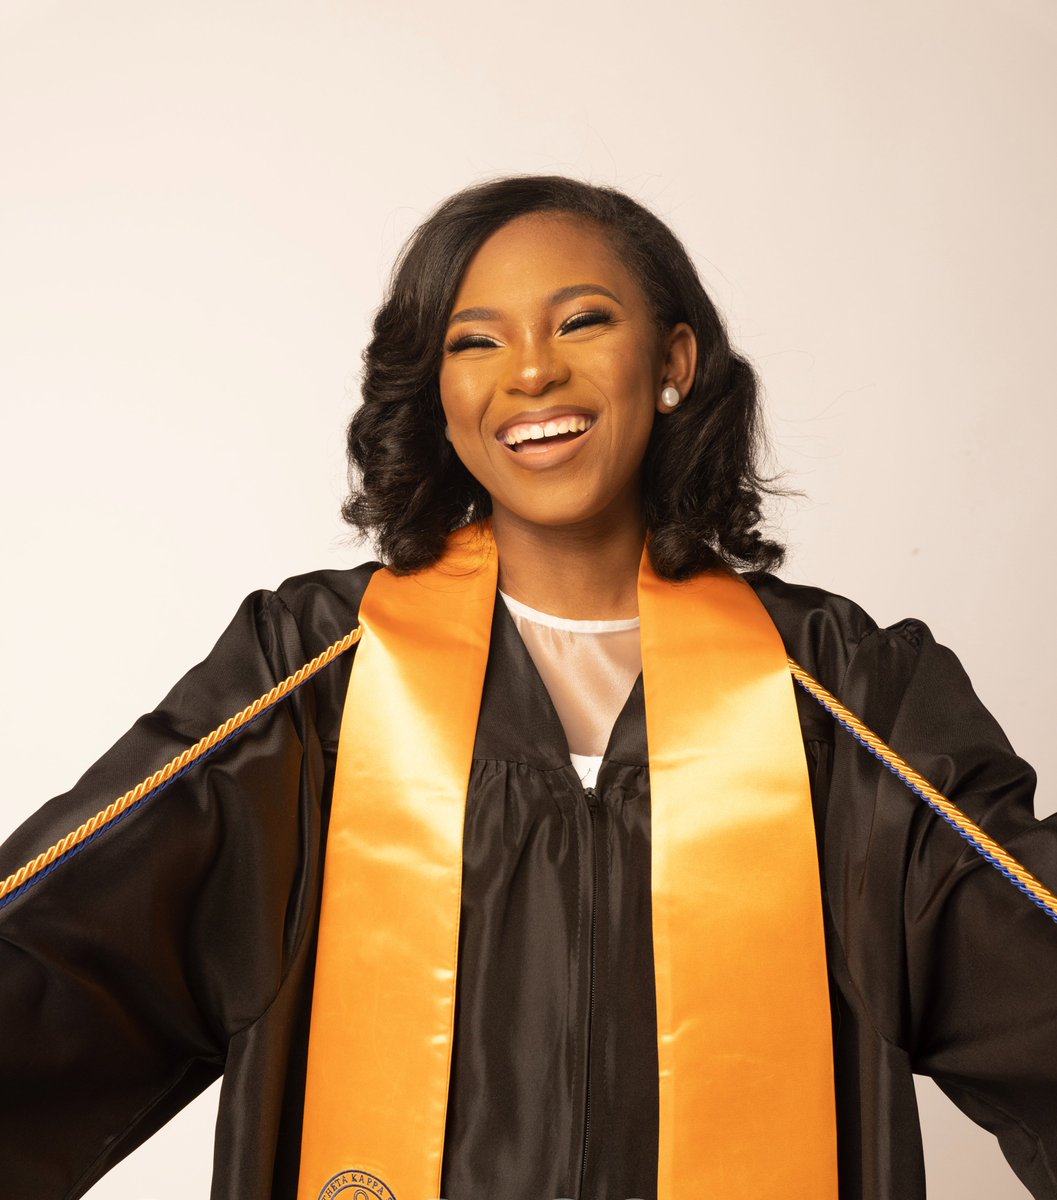 I’m excited to share that Madison Corzine is the first-ever recipient of the Michelle Obama Award for Memoir! Madison is a recent graduate from Timber Creek High School in Fort Worth, Texas. In the fall, she will be attending @SpelmanCollege, where she plans to study English and